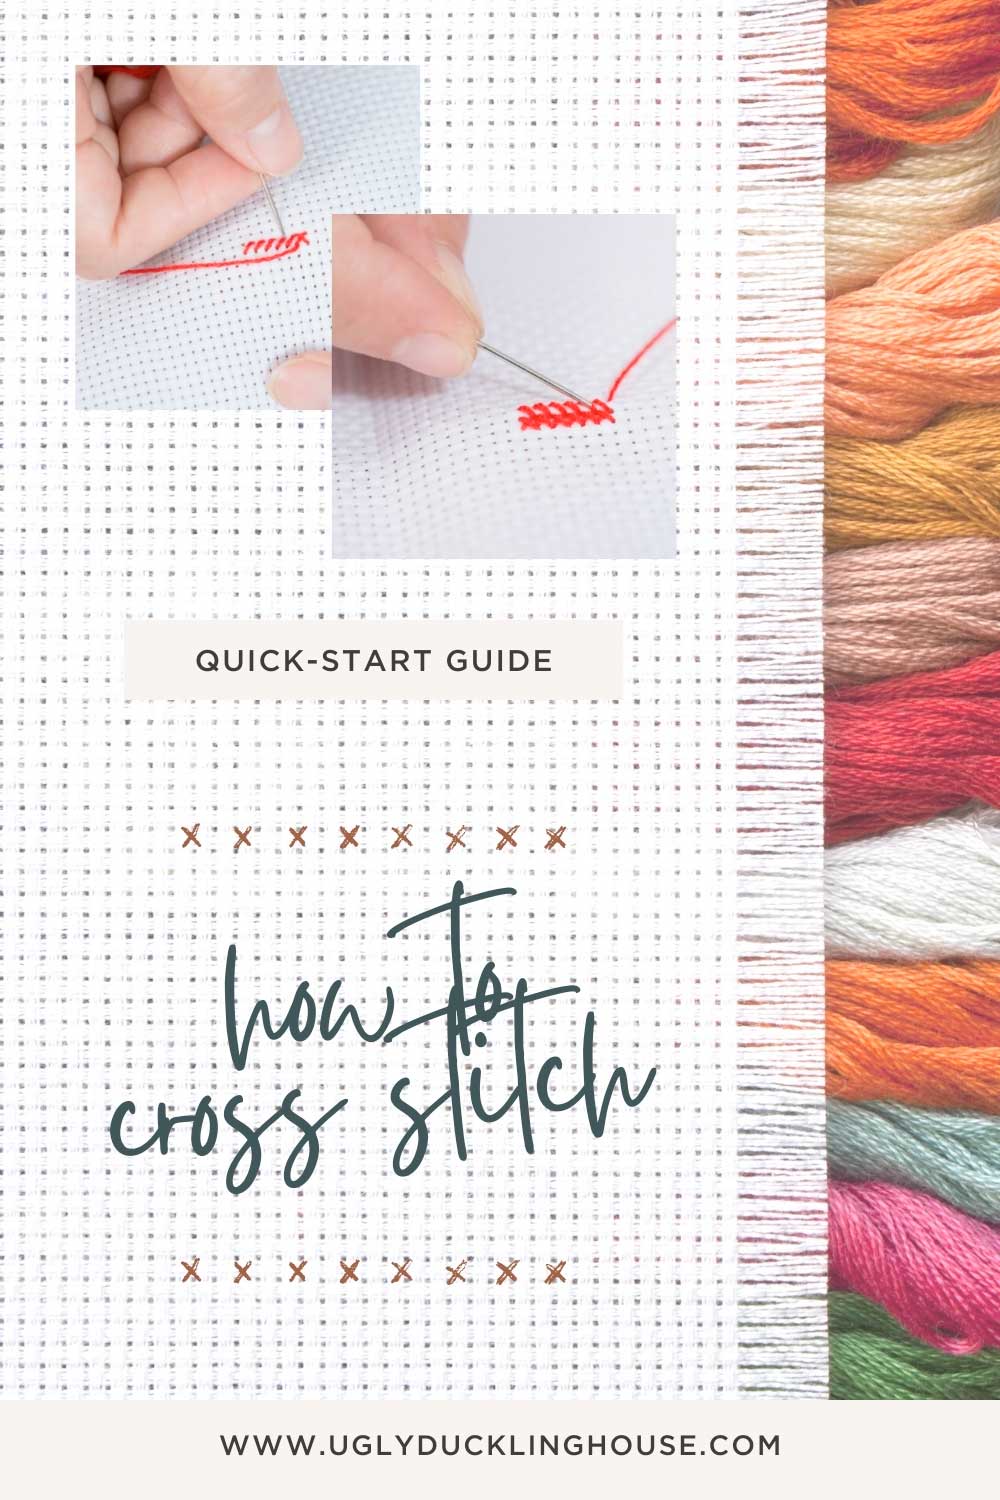 How to read a cross stitch pattern - Stitched Modern